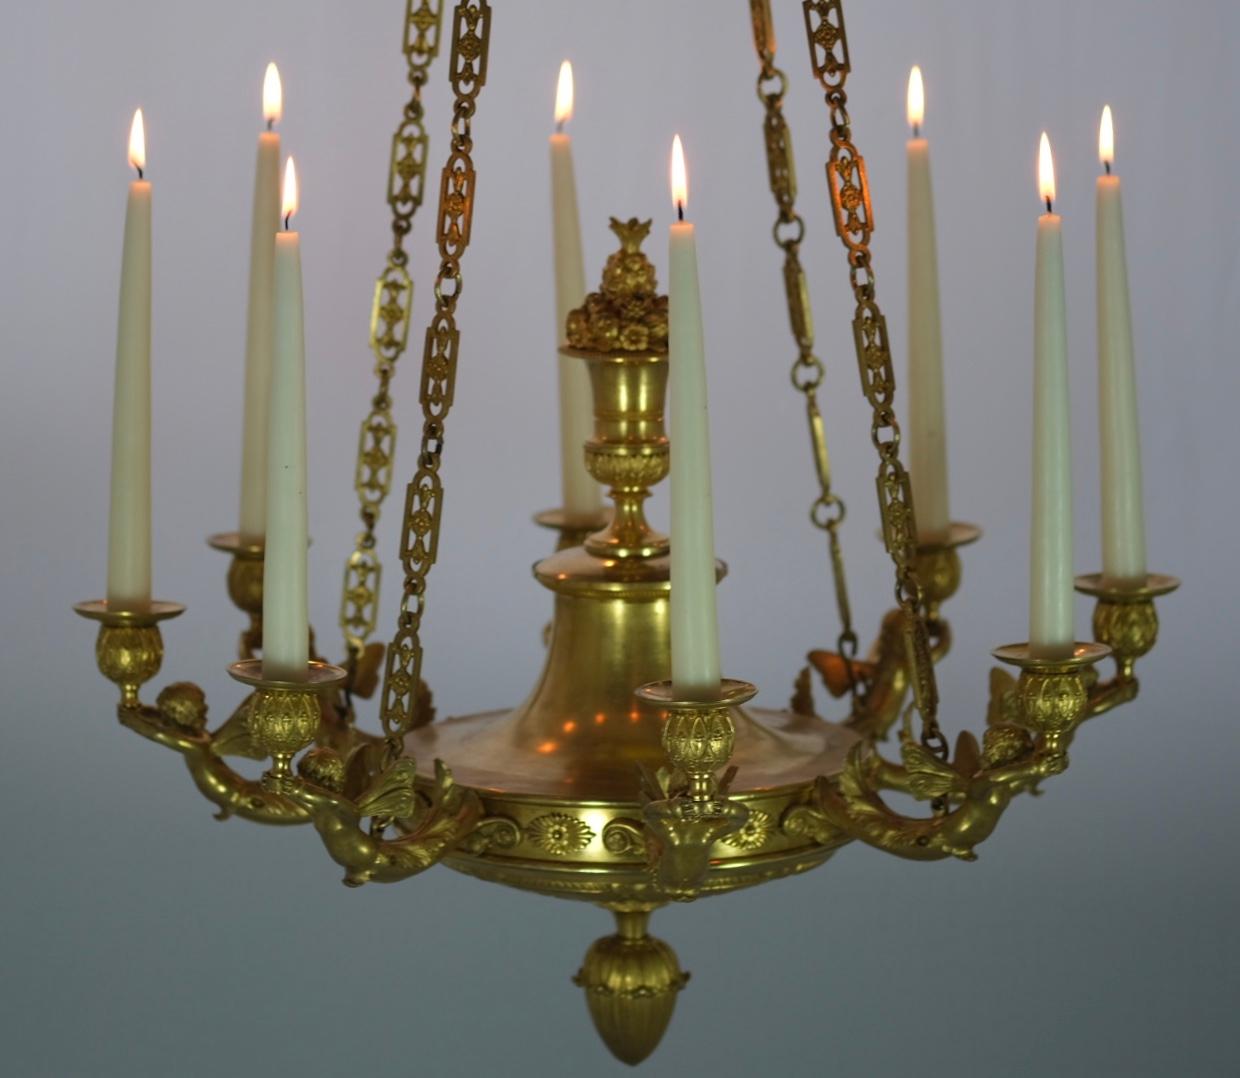 Gilt bronze chandelier with eight candleholders. Great design with be winged putts holding the urns that in turn holds the candles. Good quality and condition.